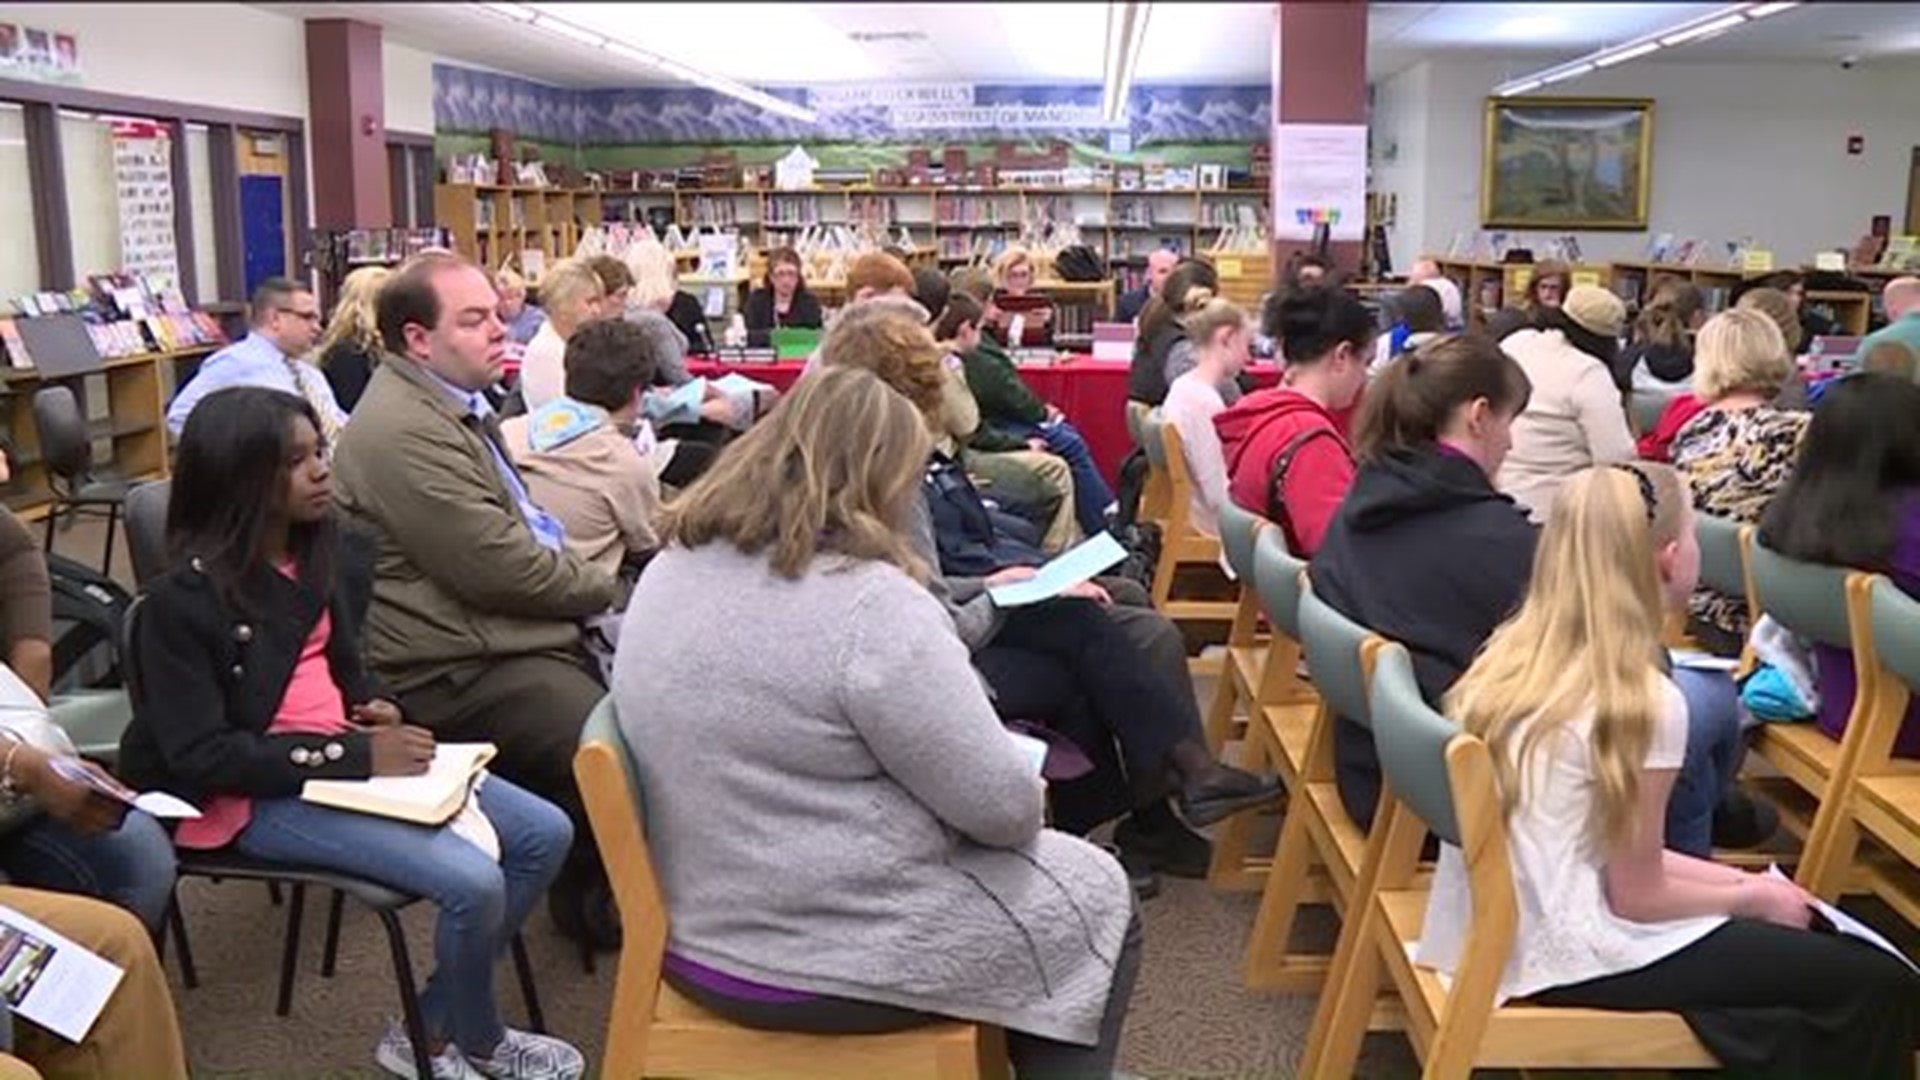 Parents, students come together in Manchester to discuss bullying issues